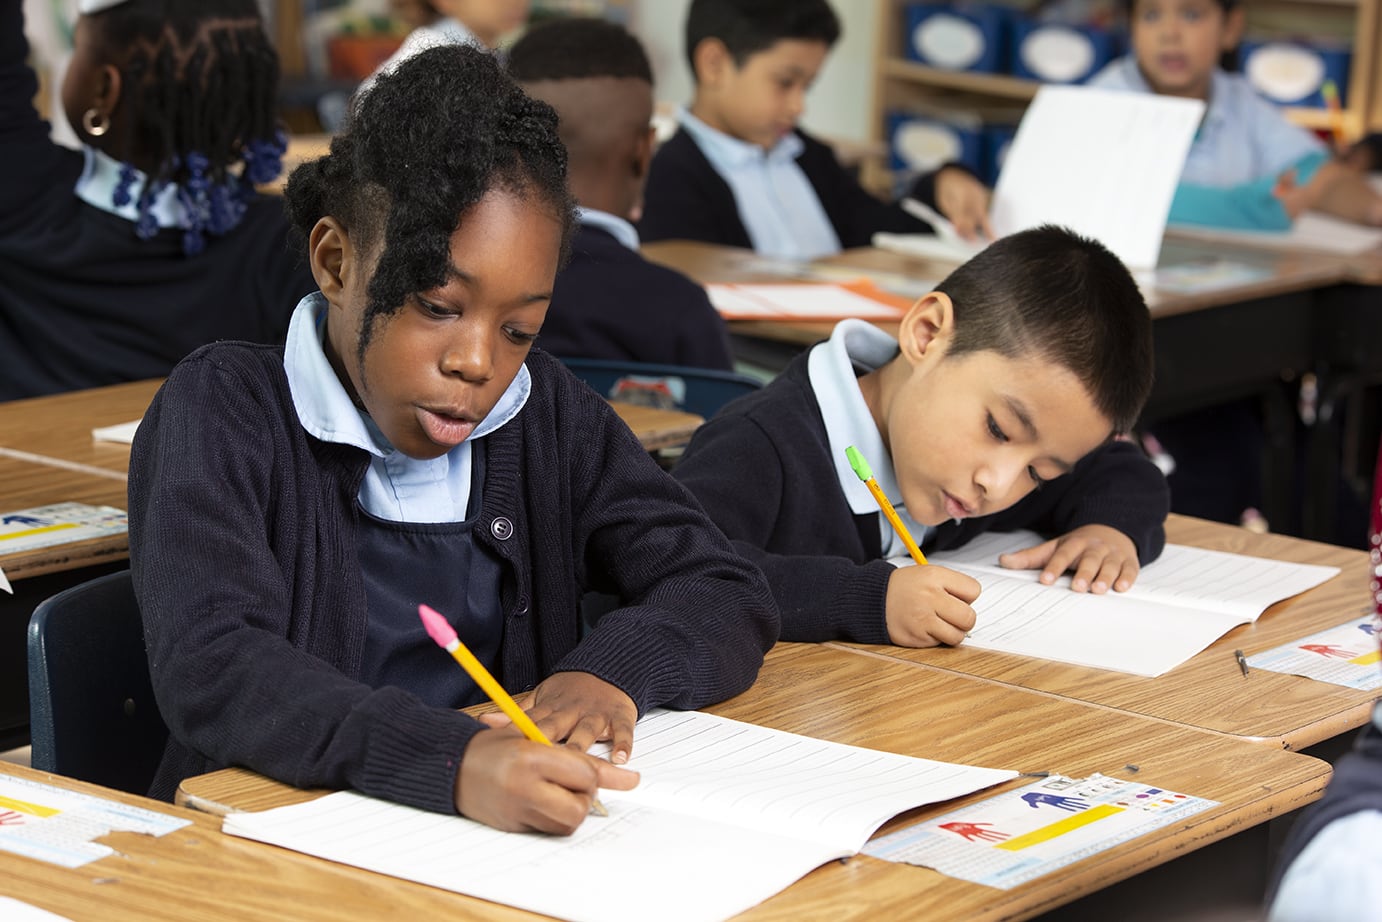 Two students in school uniforms focused on writing in their notebooks at a classroom desk during a science lesson.